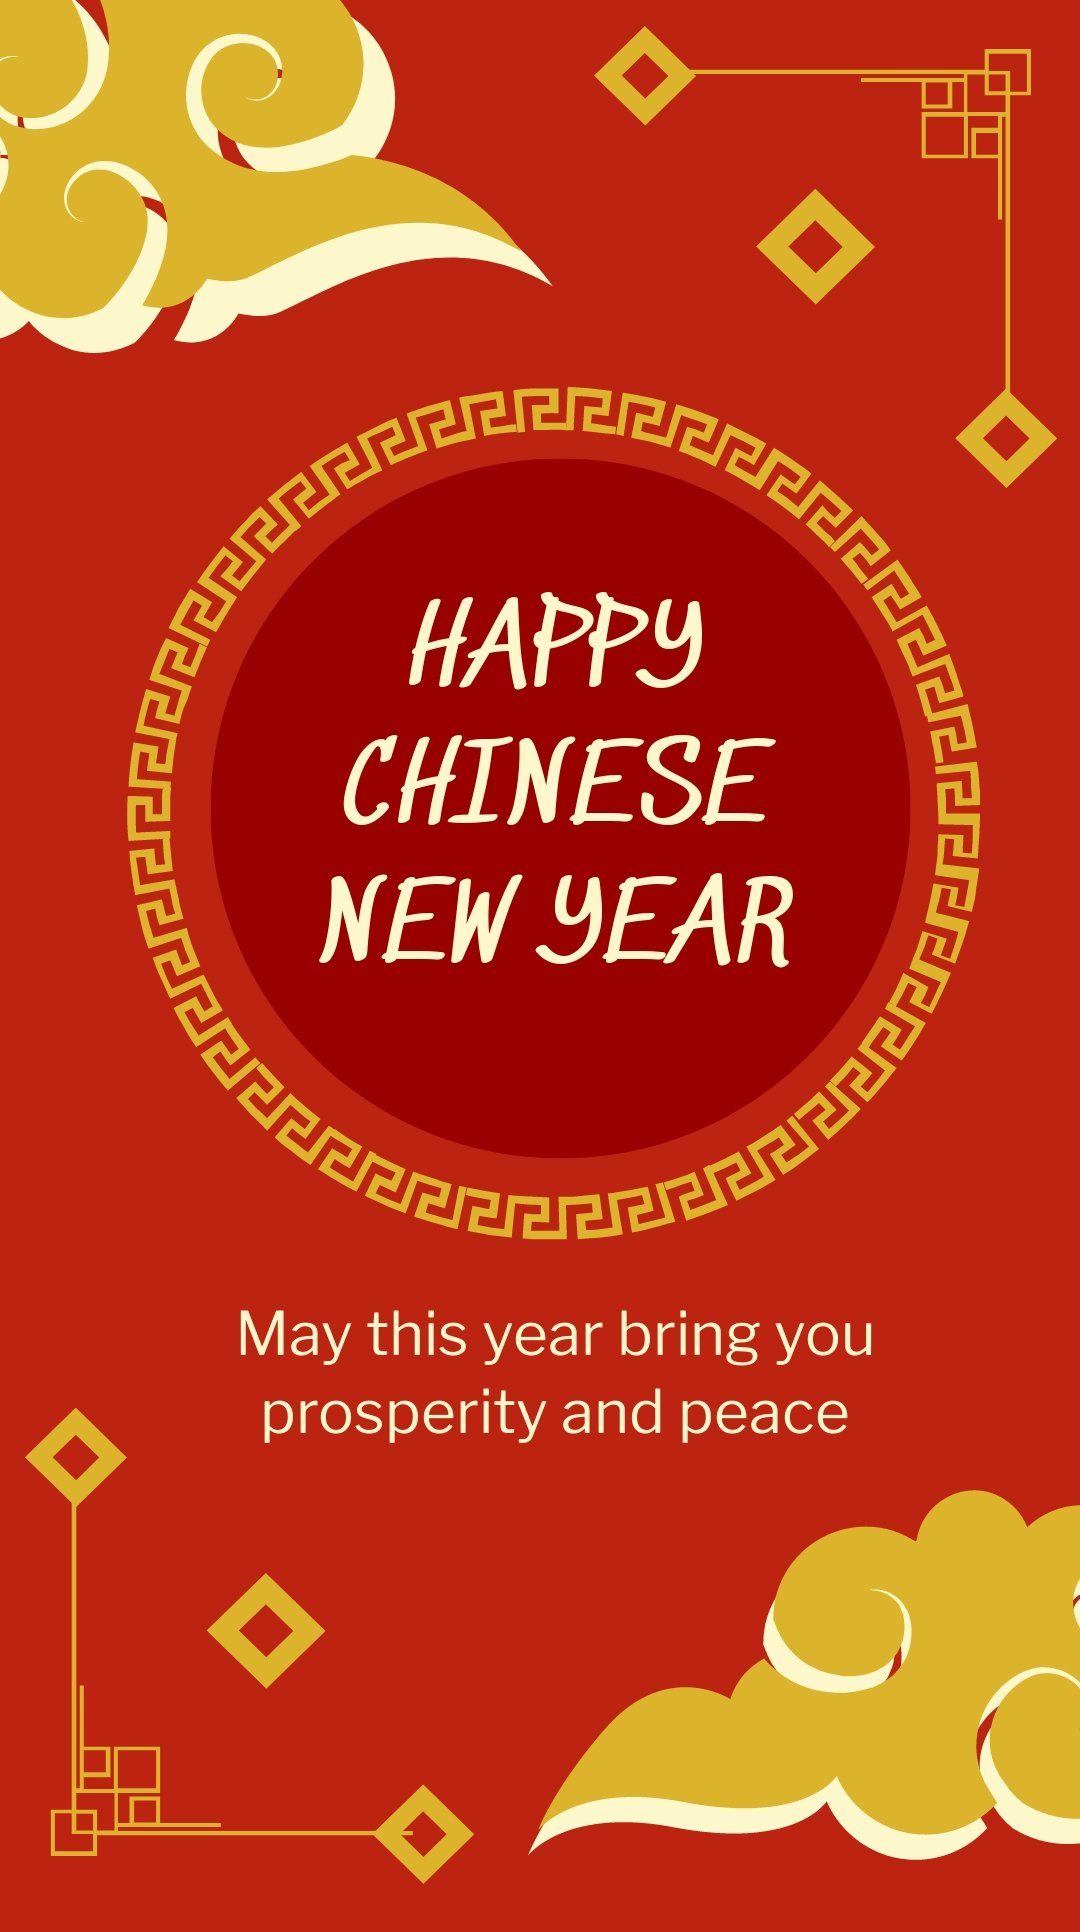 Free Vintage Chinese New Year Whatsapp Post Template